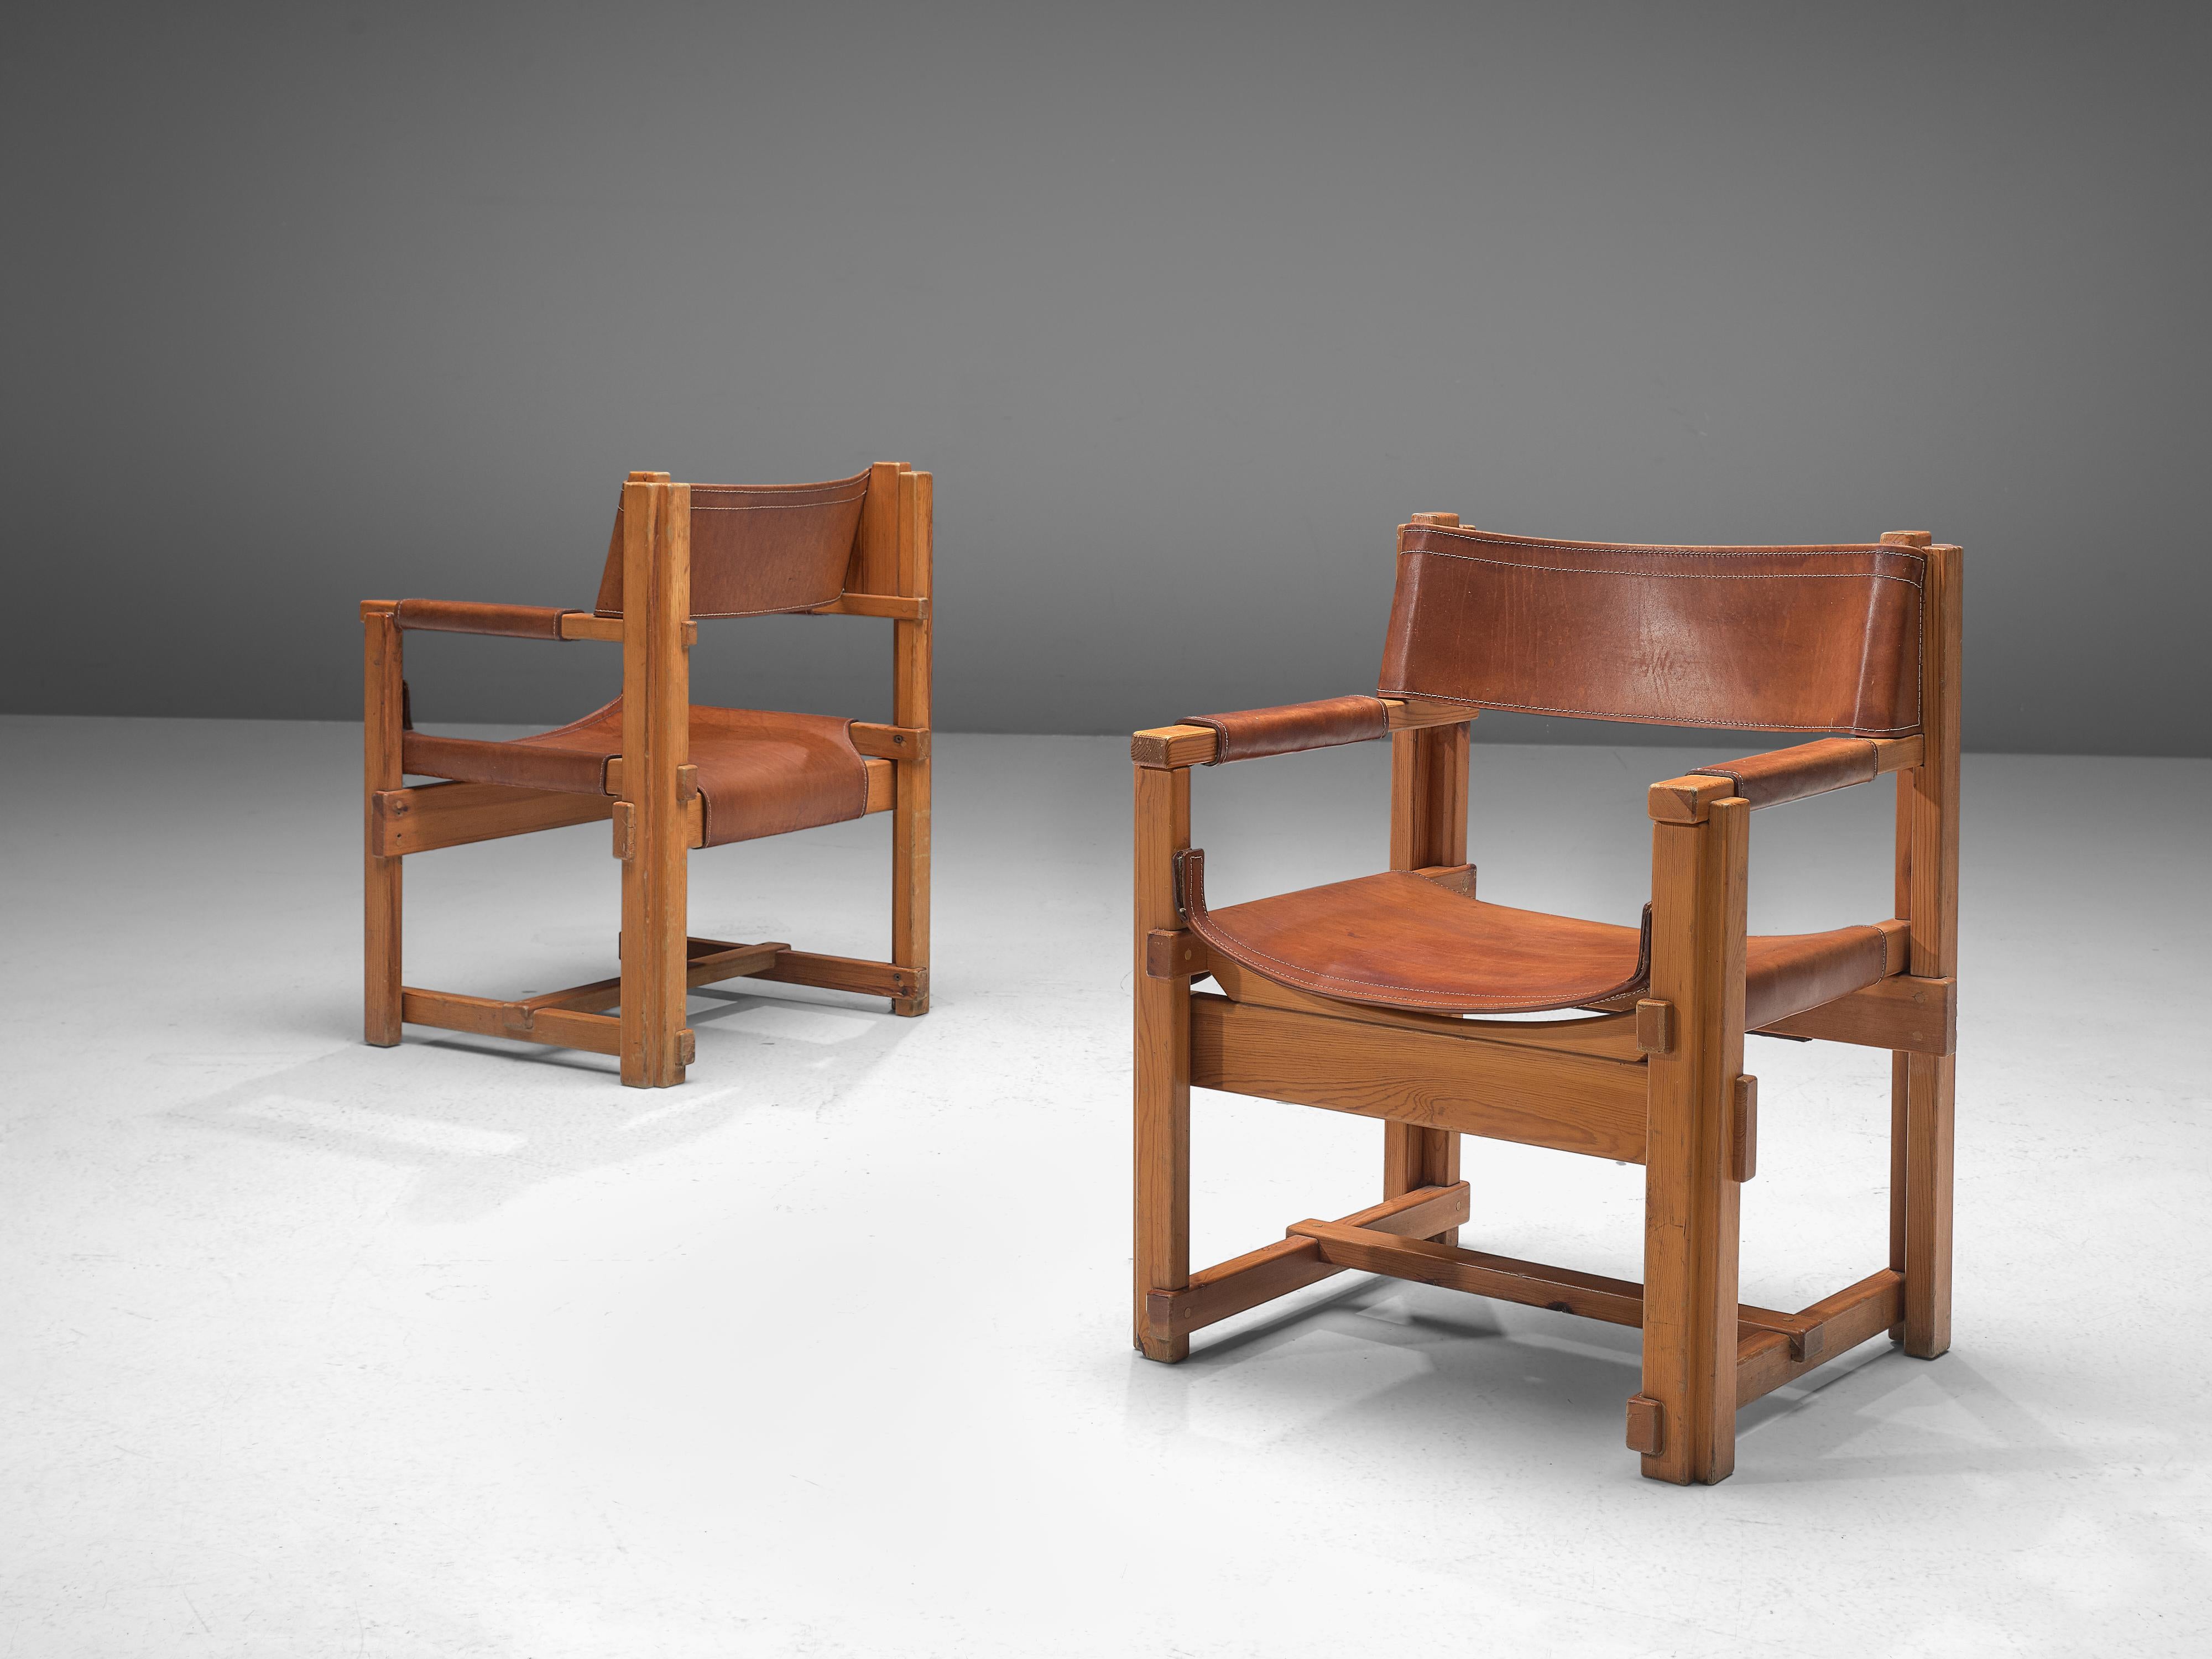 Joan Pou, armchairs, pine, leather, Spain, 1960s

This set of armchairs from Spain is strict, purist and belongs to the rationalist movement in Spain. The chairs feature an architectural frame, build up from only horizontal and vertical lines. These